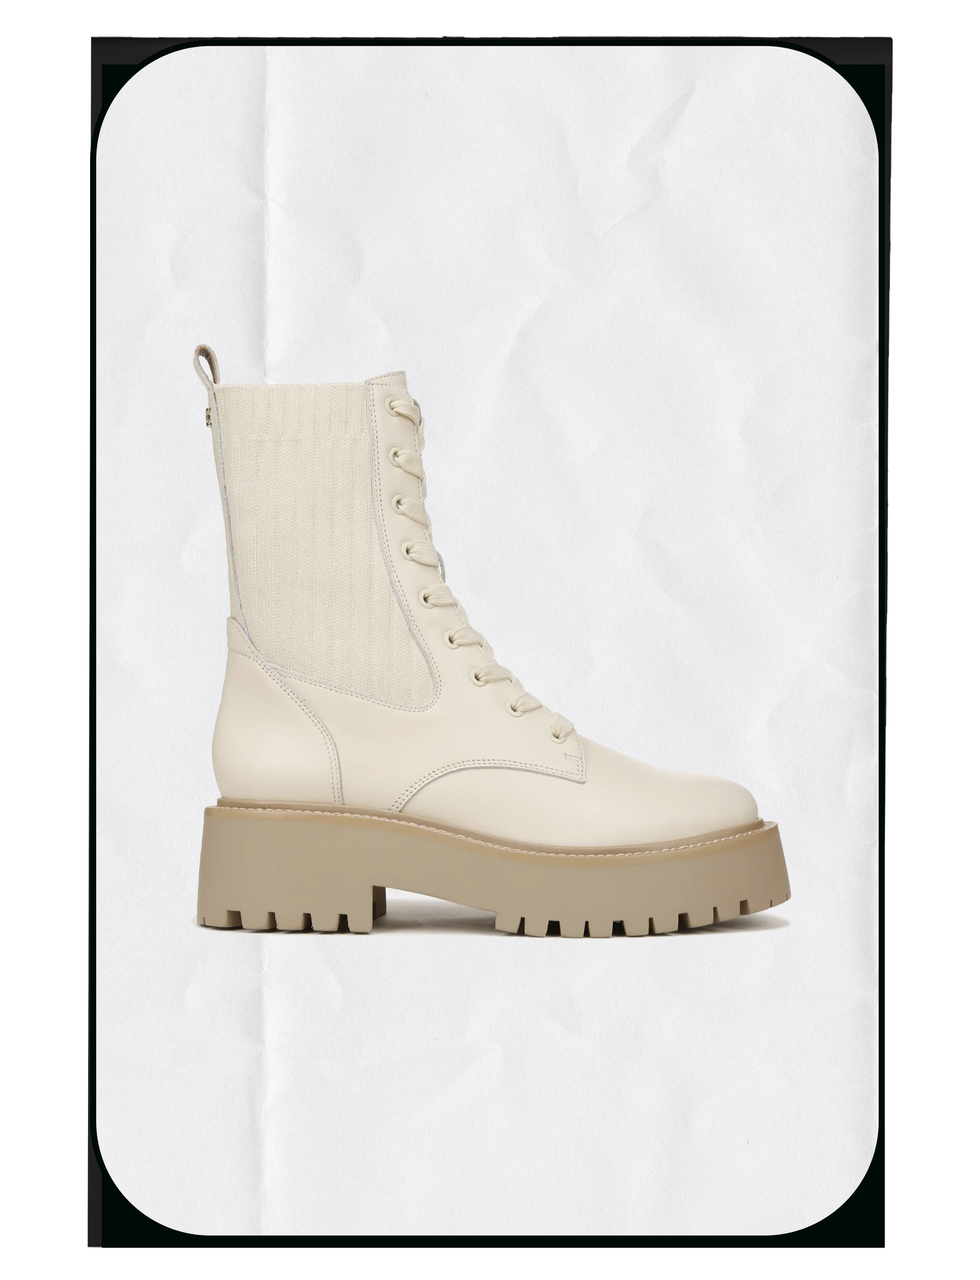 How to wear Dior's Military boots this fall